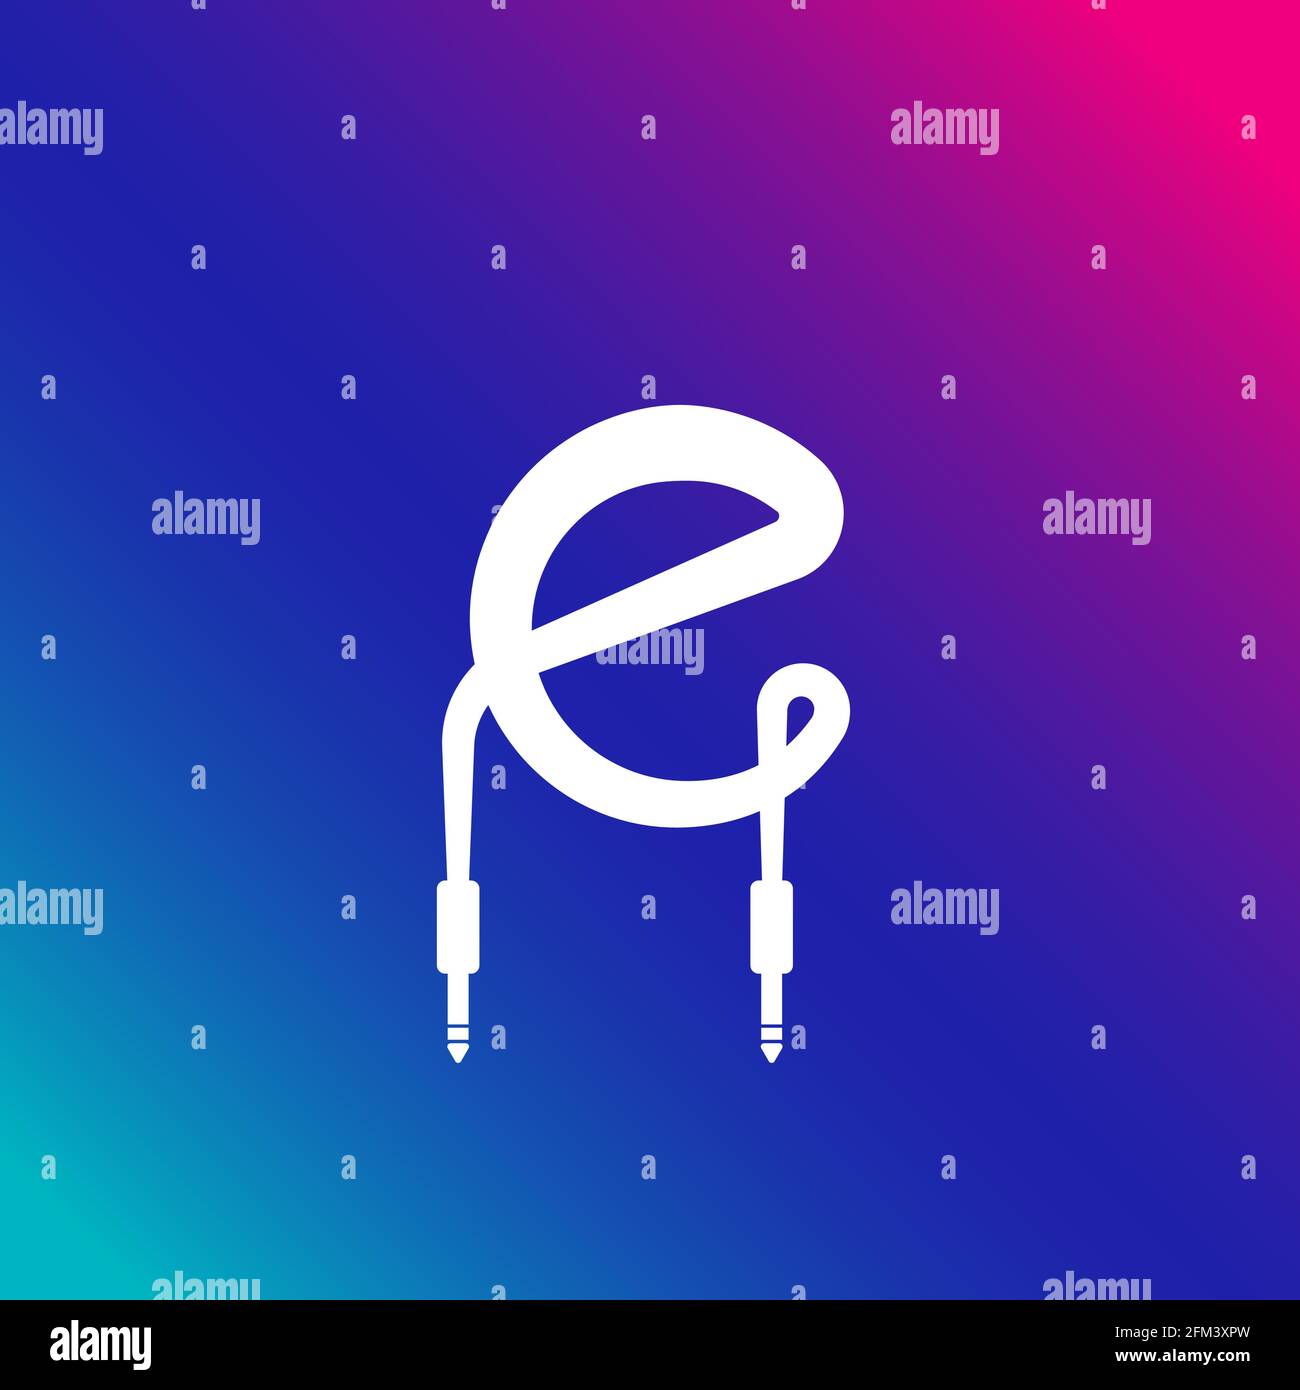 Lowercase Letter E Alphabet Music Logo Design on Multicolor Gradient background. Initial and Audio cable jack logo concept. Stock Vector